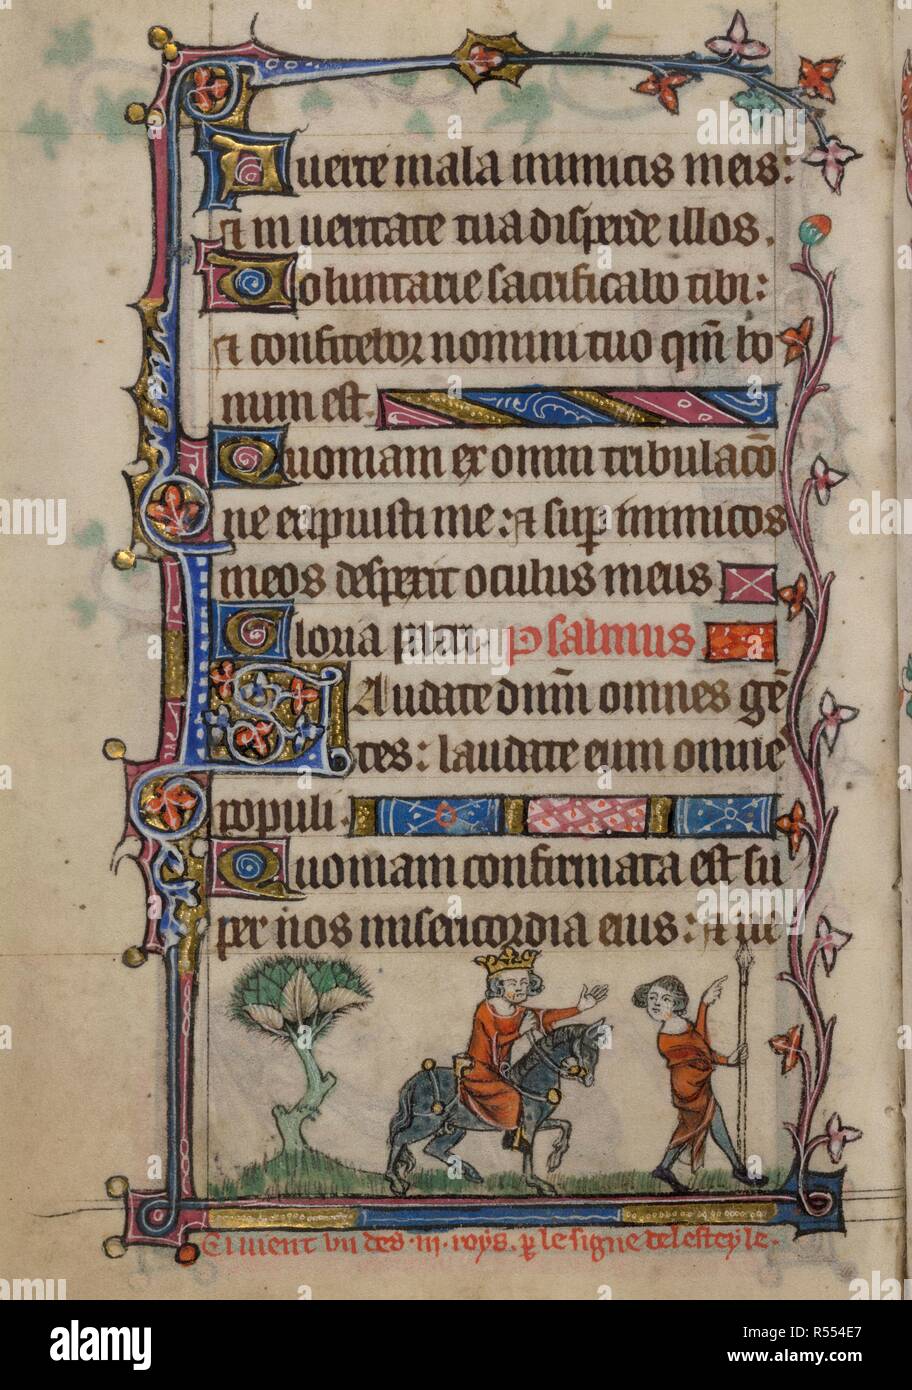 Bas-de-page-scene of one of the three Magi on horseback, led by a servant holding a spear, with a caption reading 'Cy vient un des .iii roys p[ar] le signe del esteyle'. Book of Hours, Use of Sarum ('The Taymouth Hours'). England, S. E.? (London?); 2nd quarter of the 14th century. Source: Yates Thompson 13, f.90v. Language: Latin and French. Stock Photo